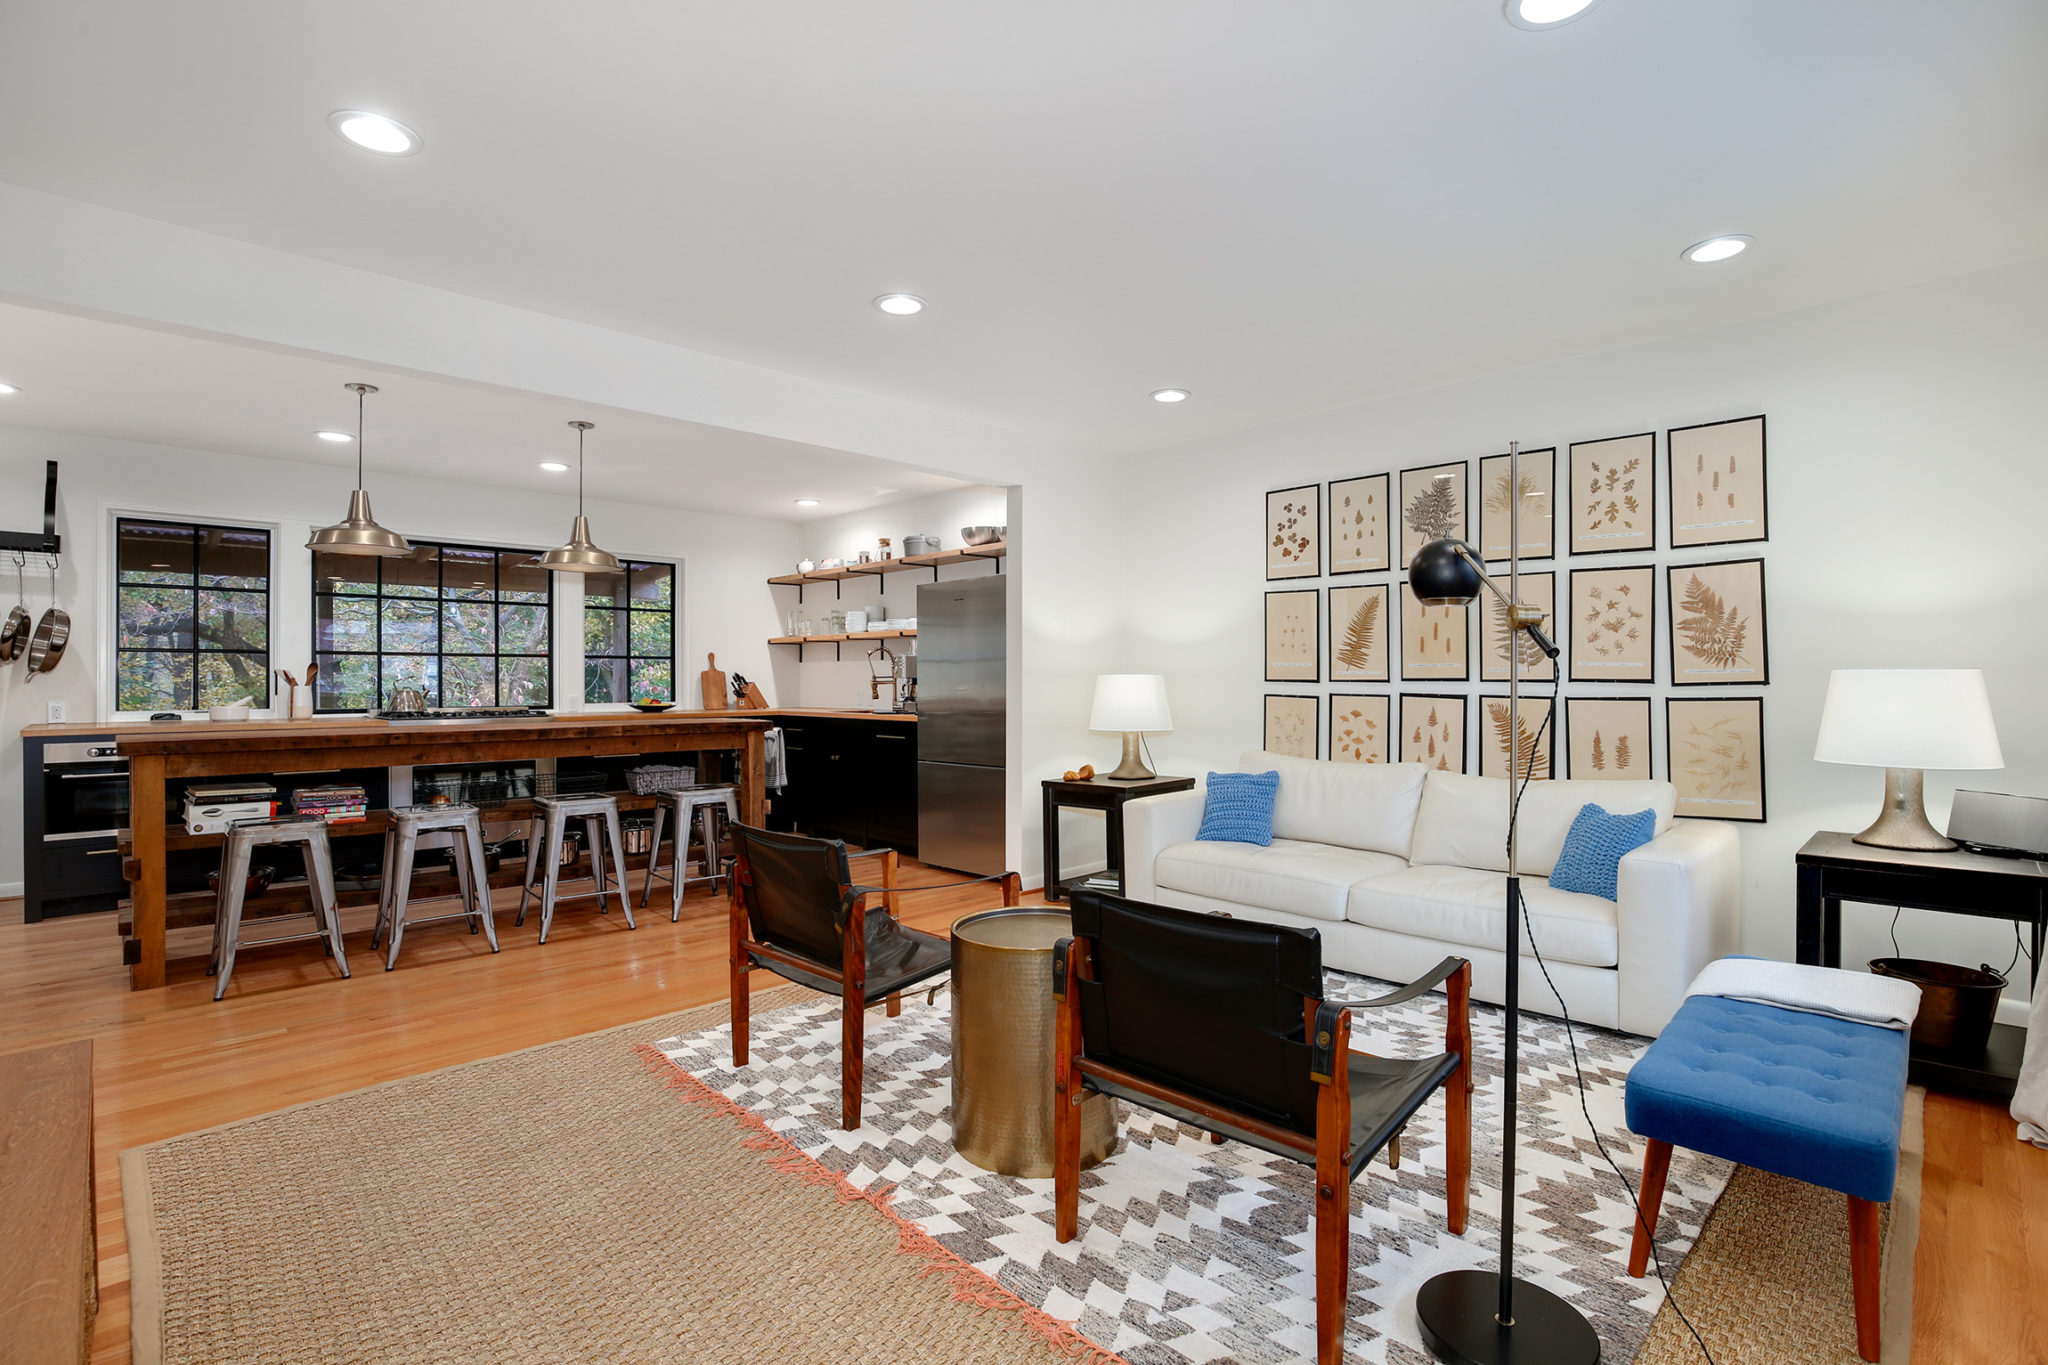 Hgtv S Lauren Liess Renovated This Rockville House And Now